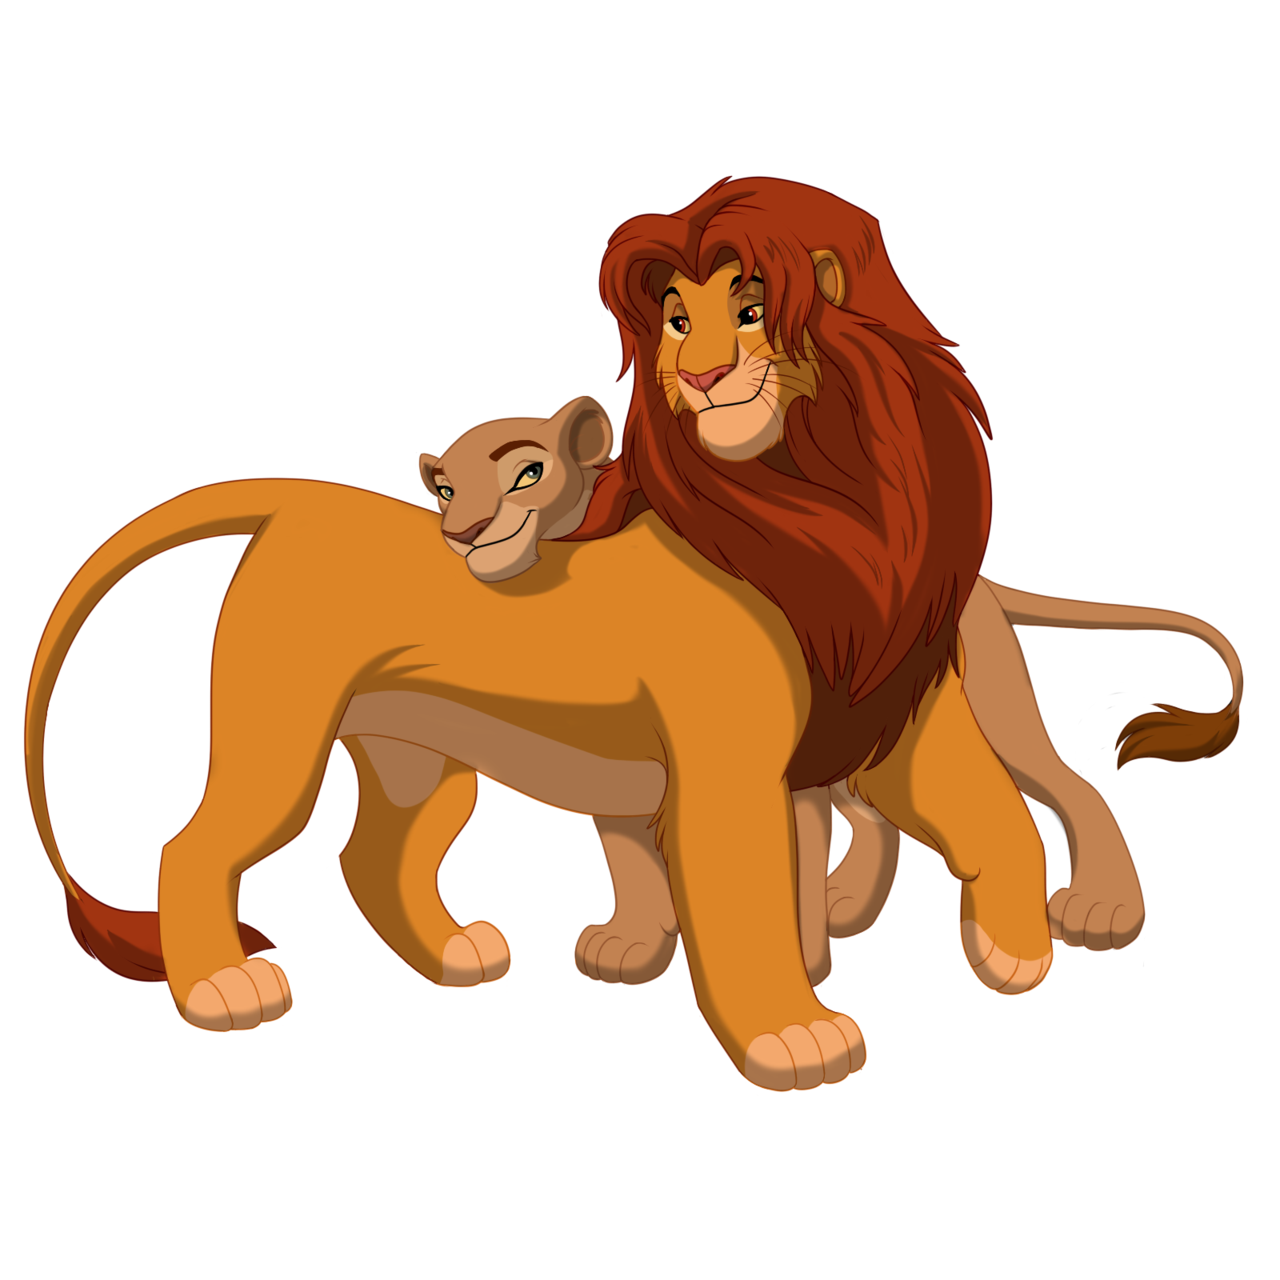 Lion King Fathers And Mothers Images Newlyweds Hd Wallpaper - Disney Lion King Png , HD Wallpaper & Backgrounds